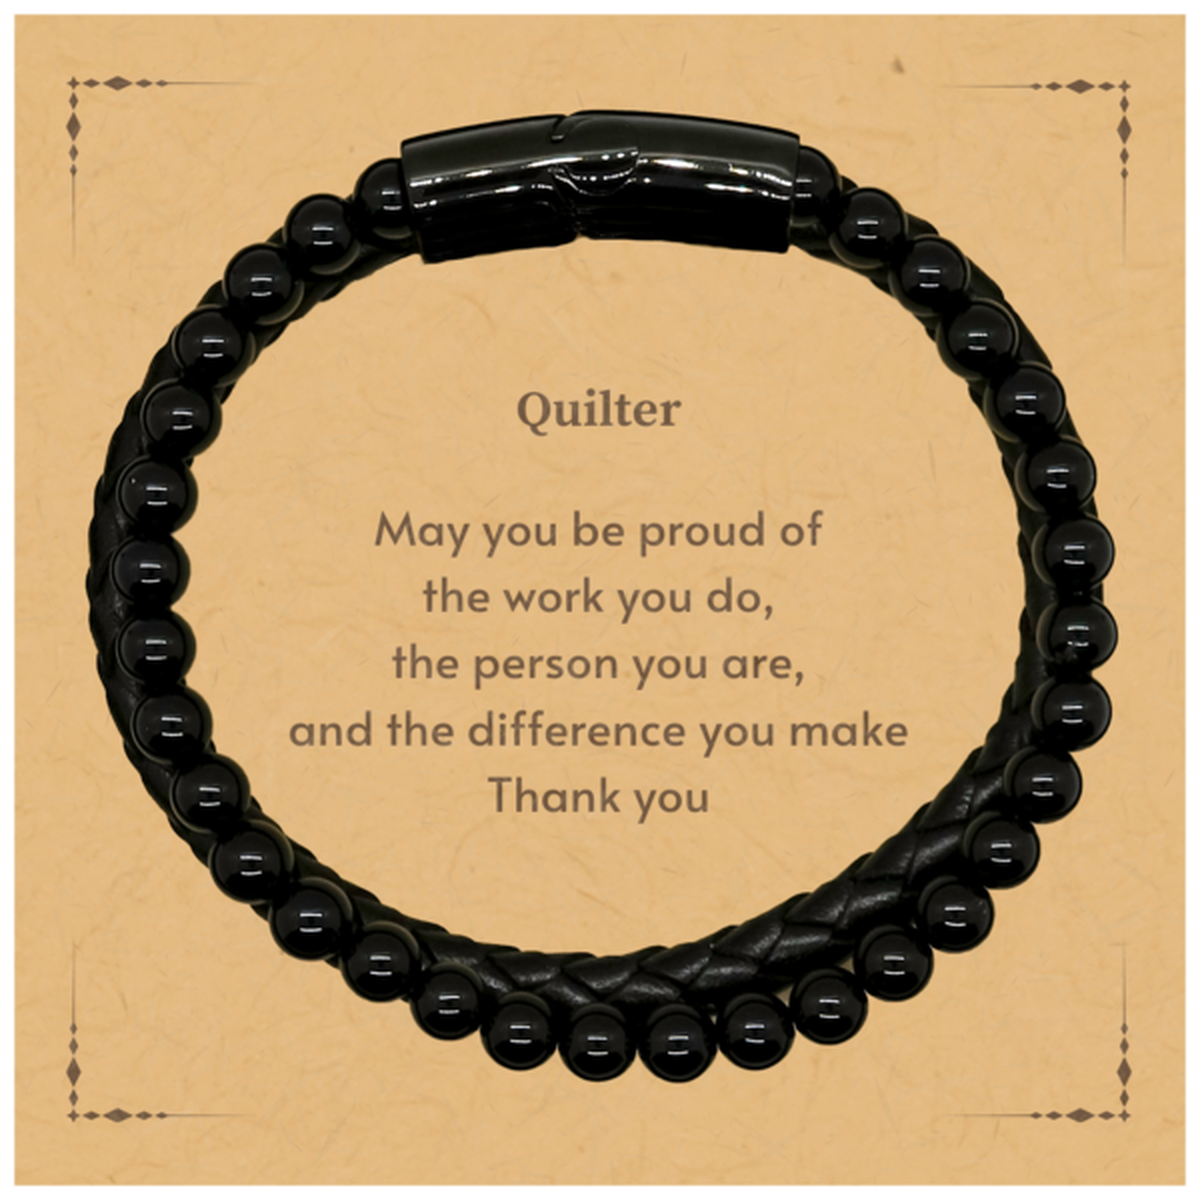 Heartwarming Stone Leather Bracelets Retirement Coworkers Gifts for Quilter, Quilter May You be proud of the work you do, the person you are Gifts for Boss Men Women Friends